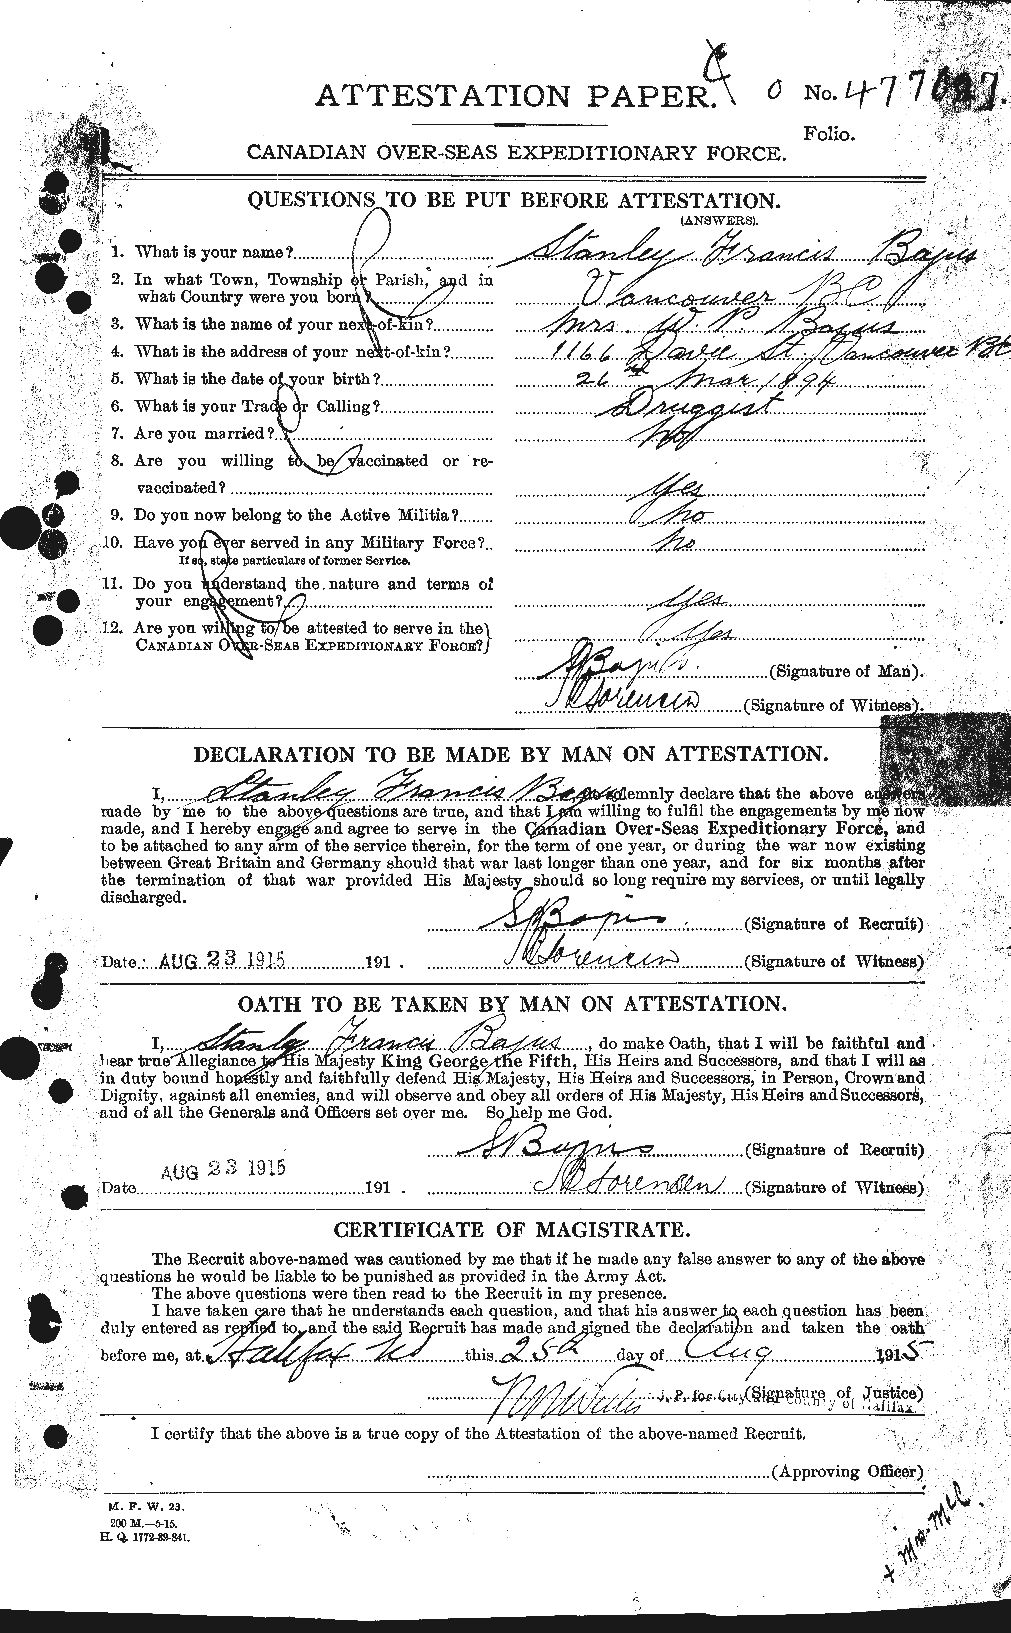 Personnel Records of the First World War - CEF 226497a